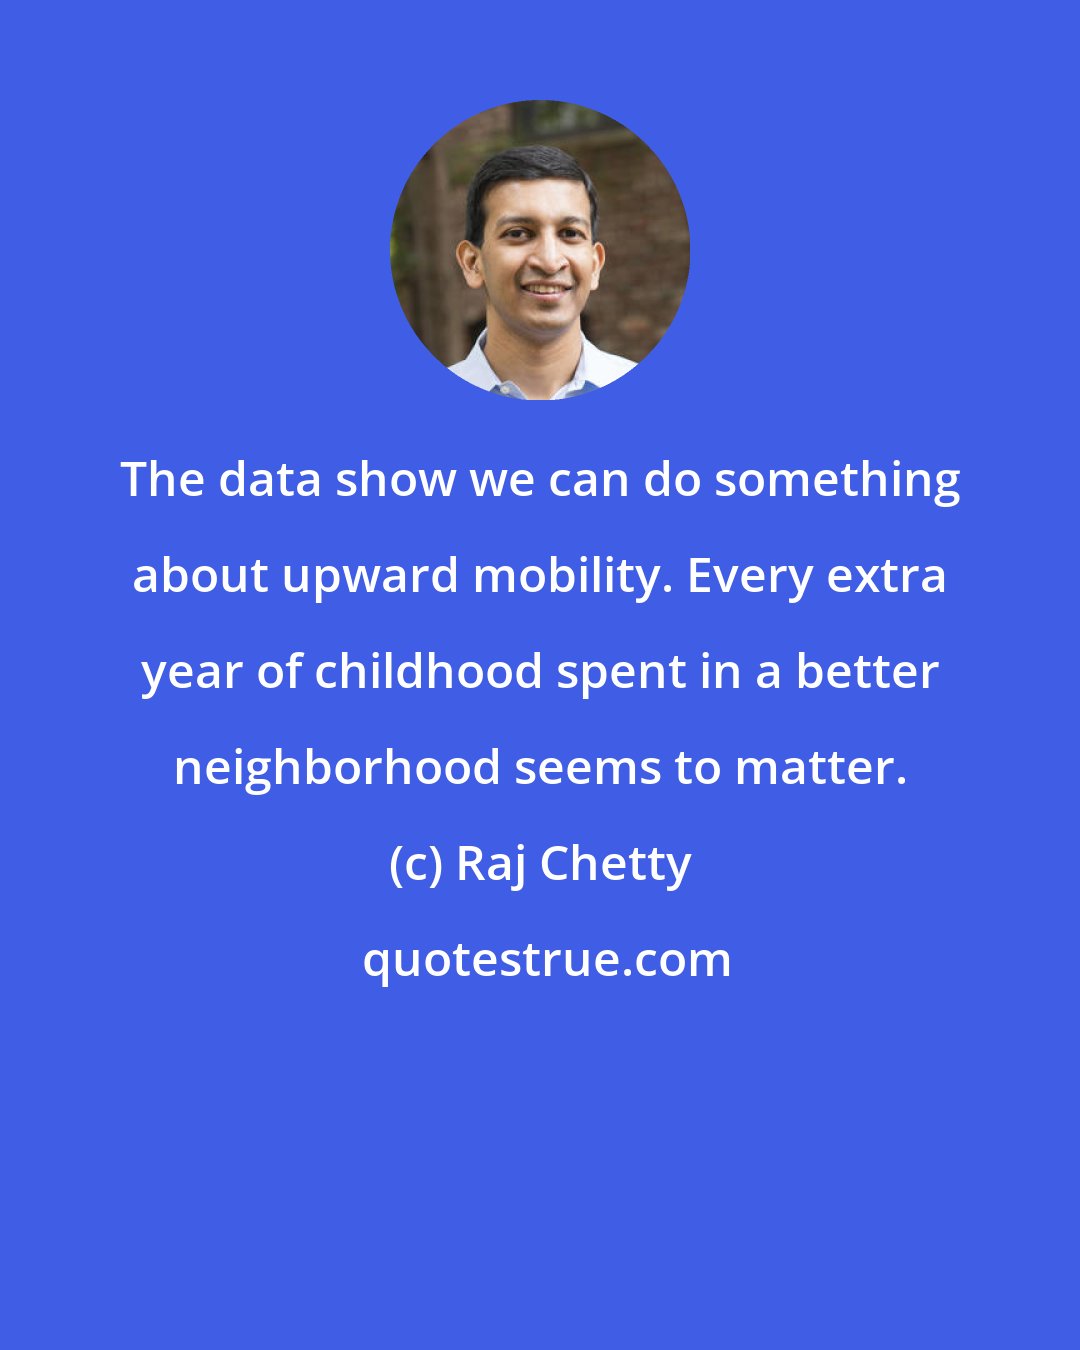 Raj Chetty: The data show we can do something about upward mobility. Every extra year of childhood spent in a better neighborhood seems to matter.